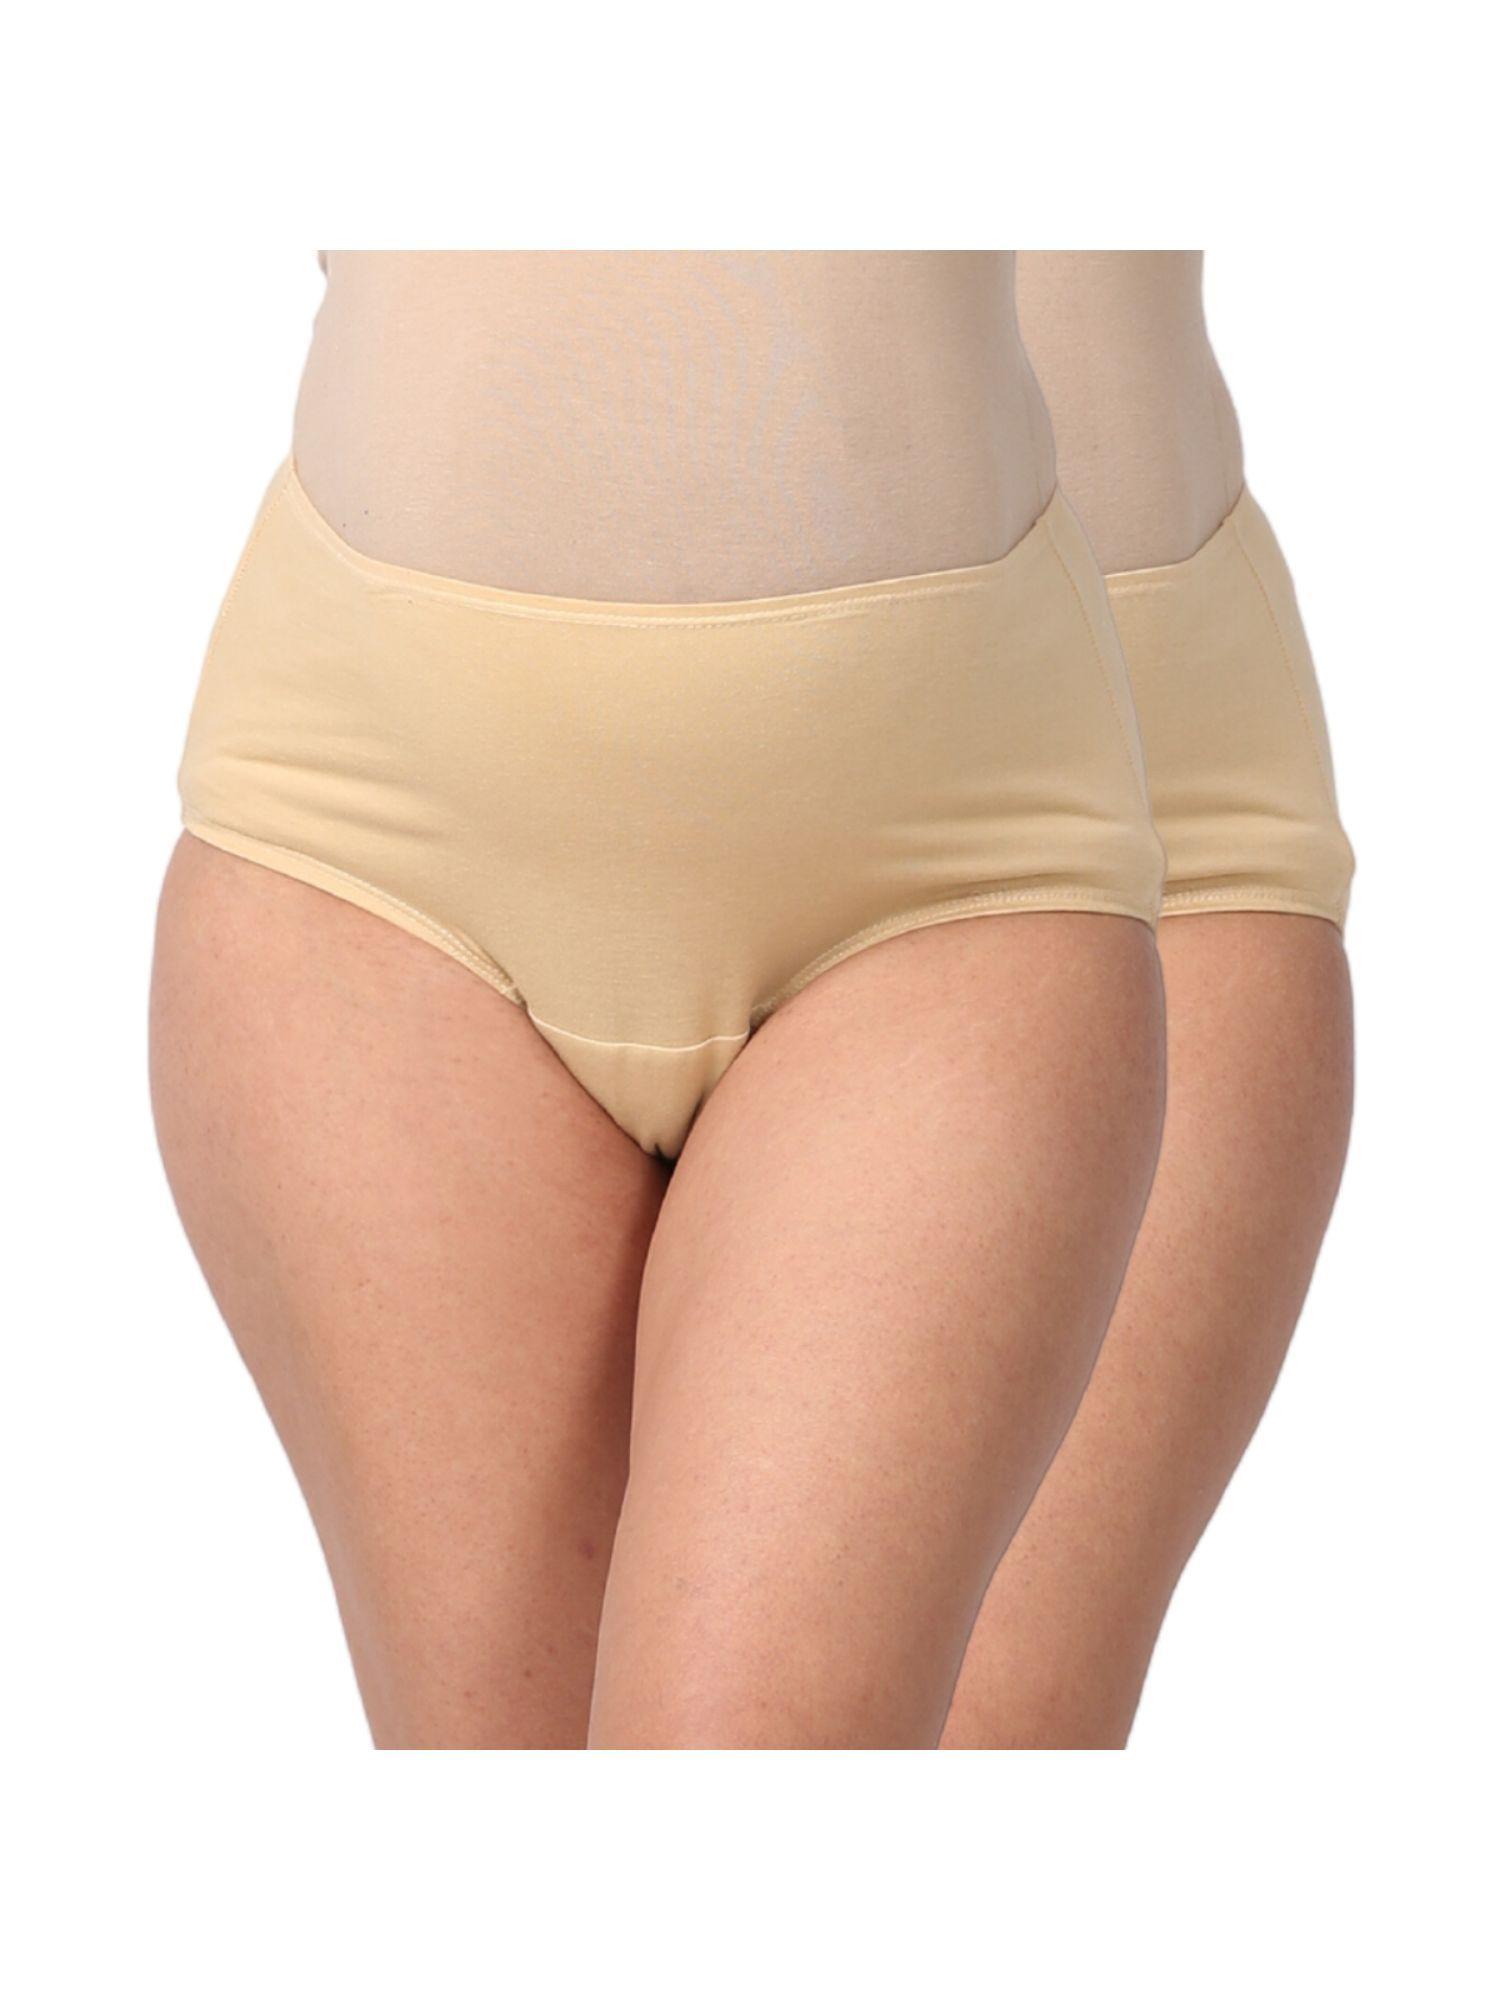 pack of 2 maternity incontinence panty - nude